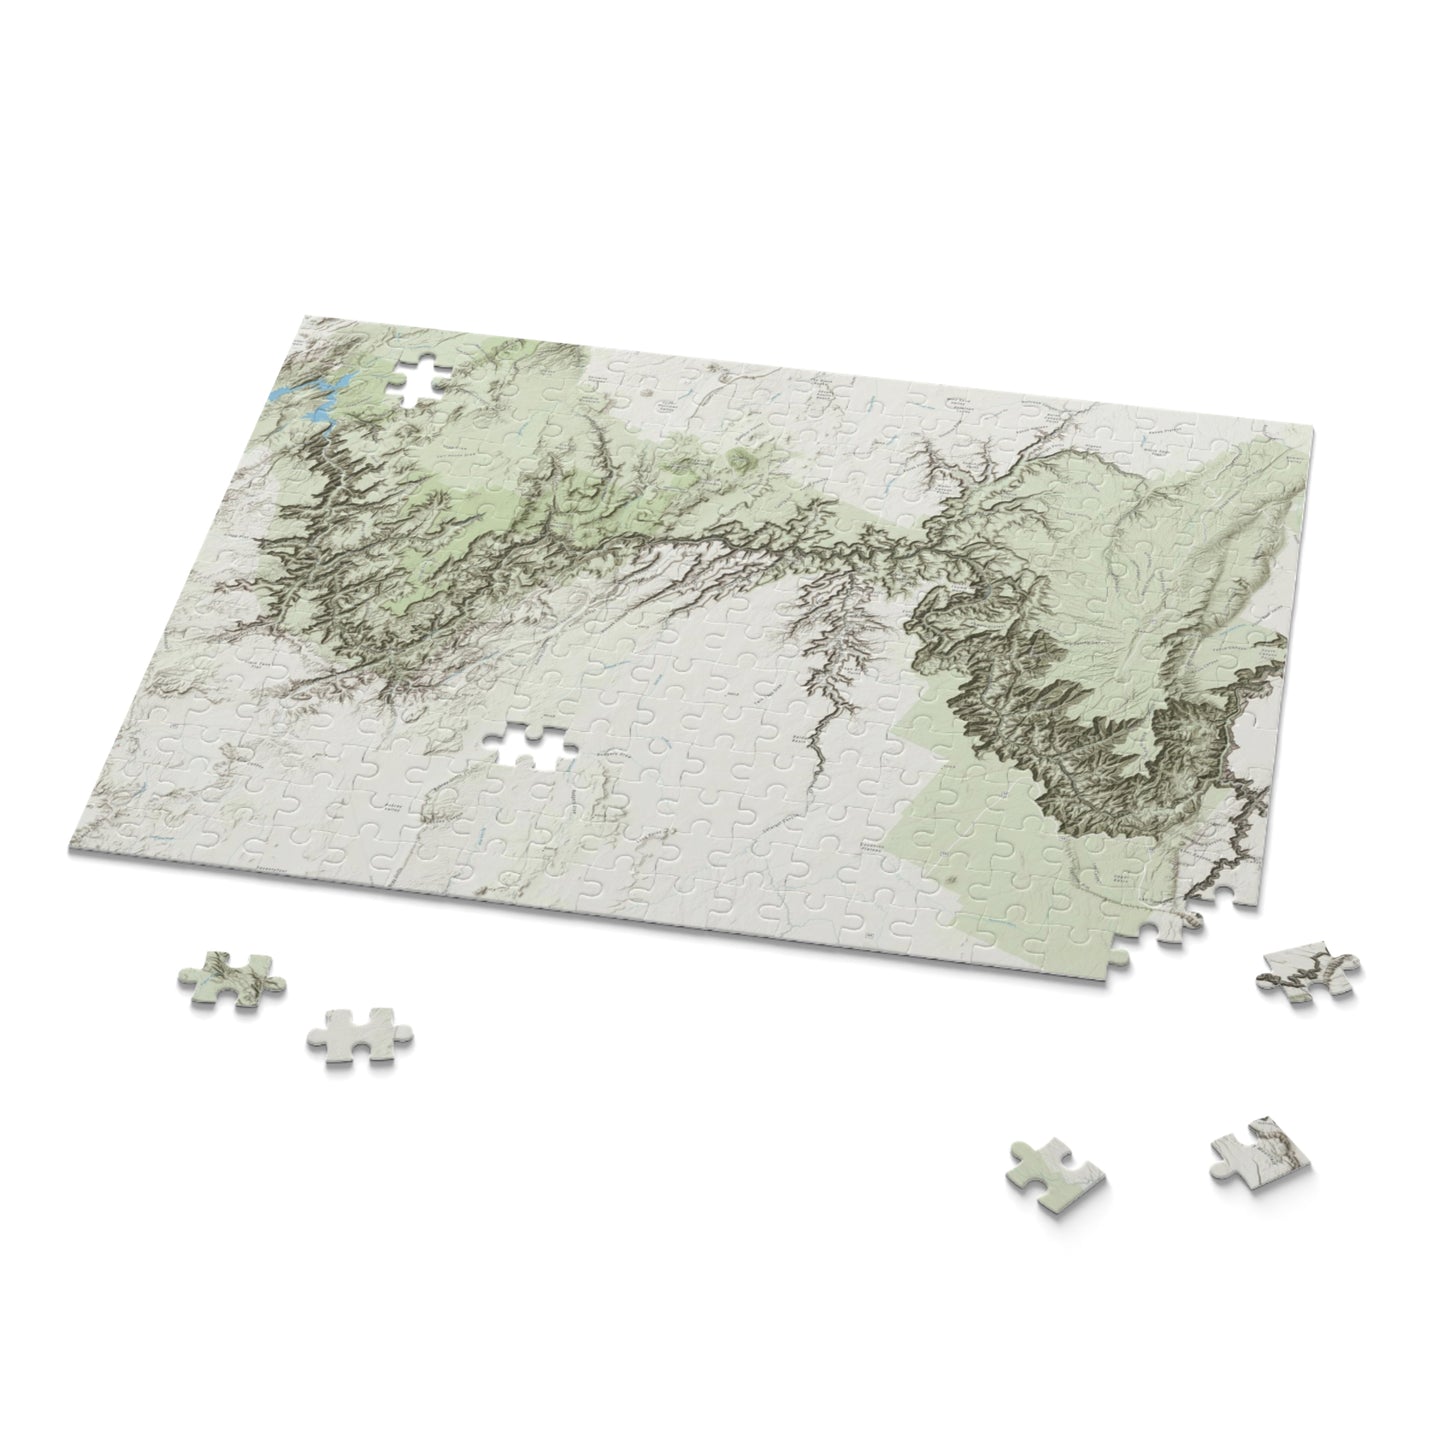 252-Piece Grand Canyon Puzzle